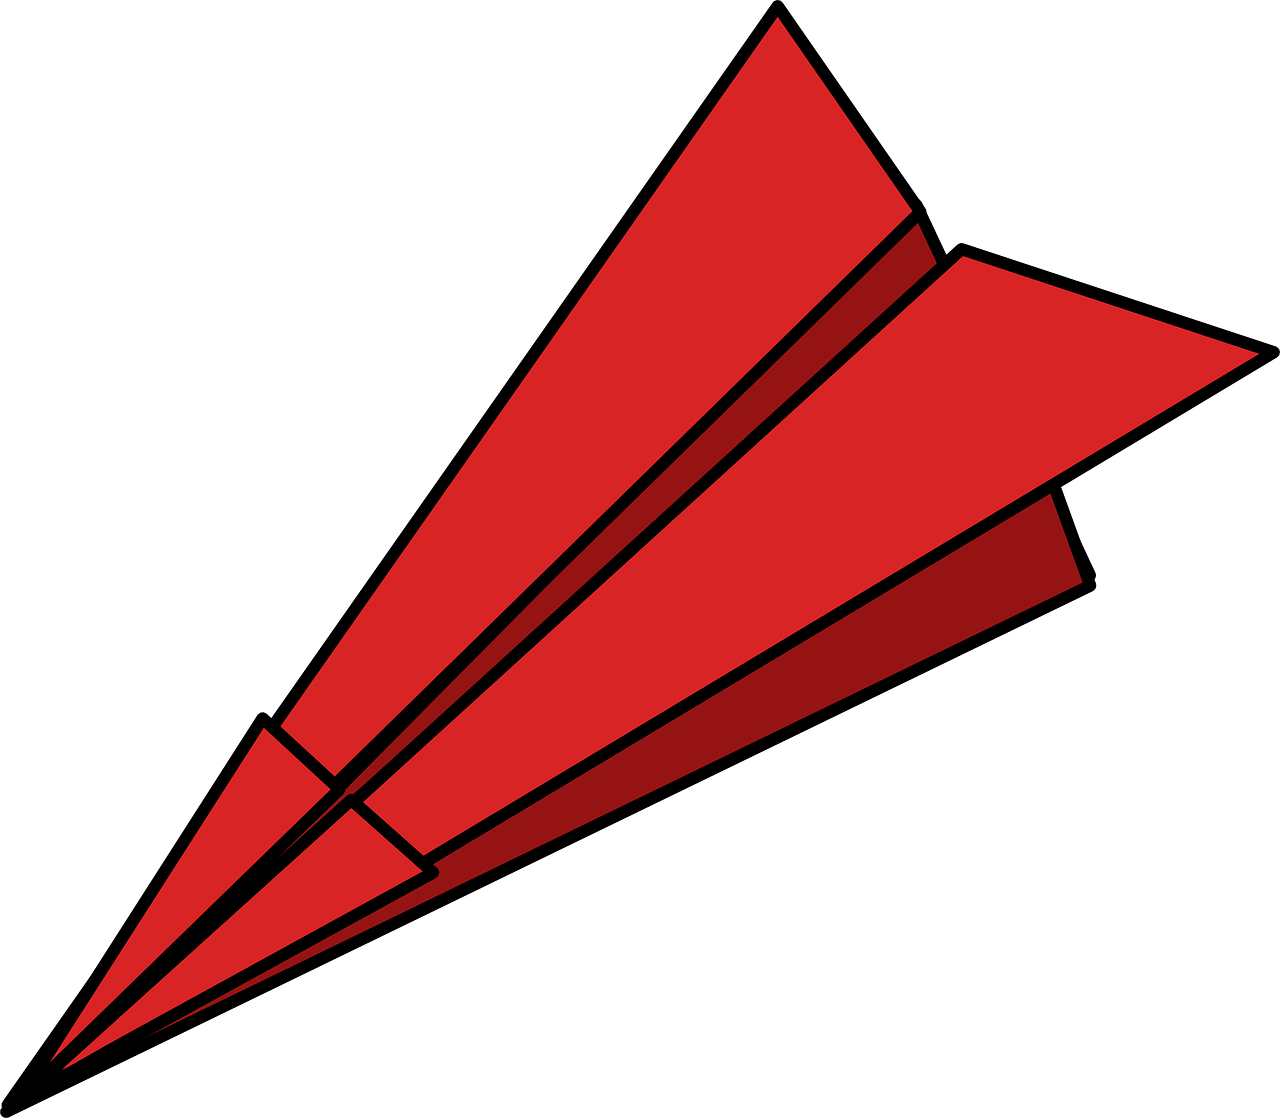 Paper Plane Origami PNG Image